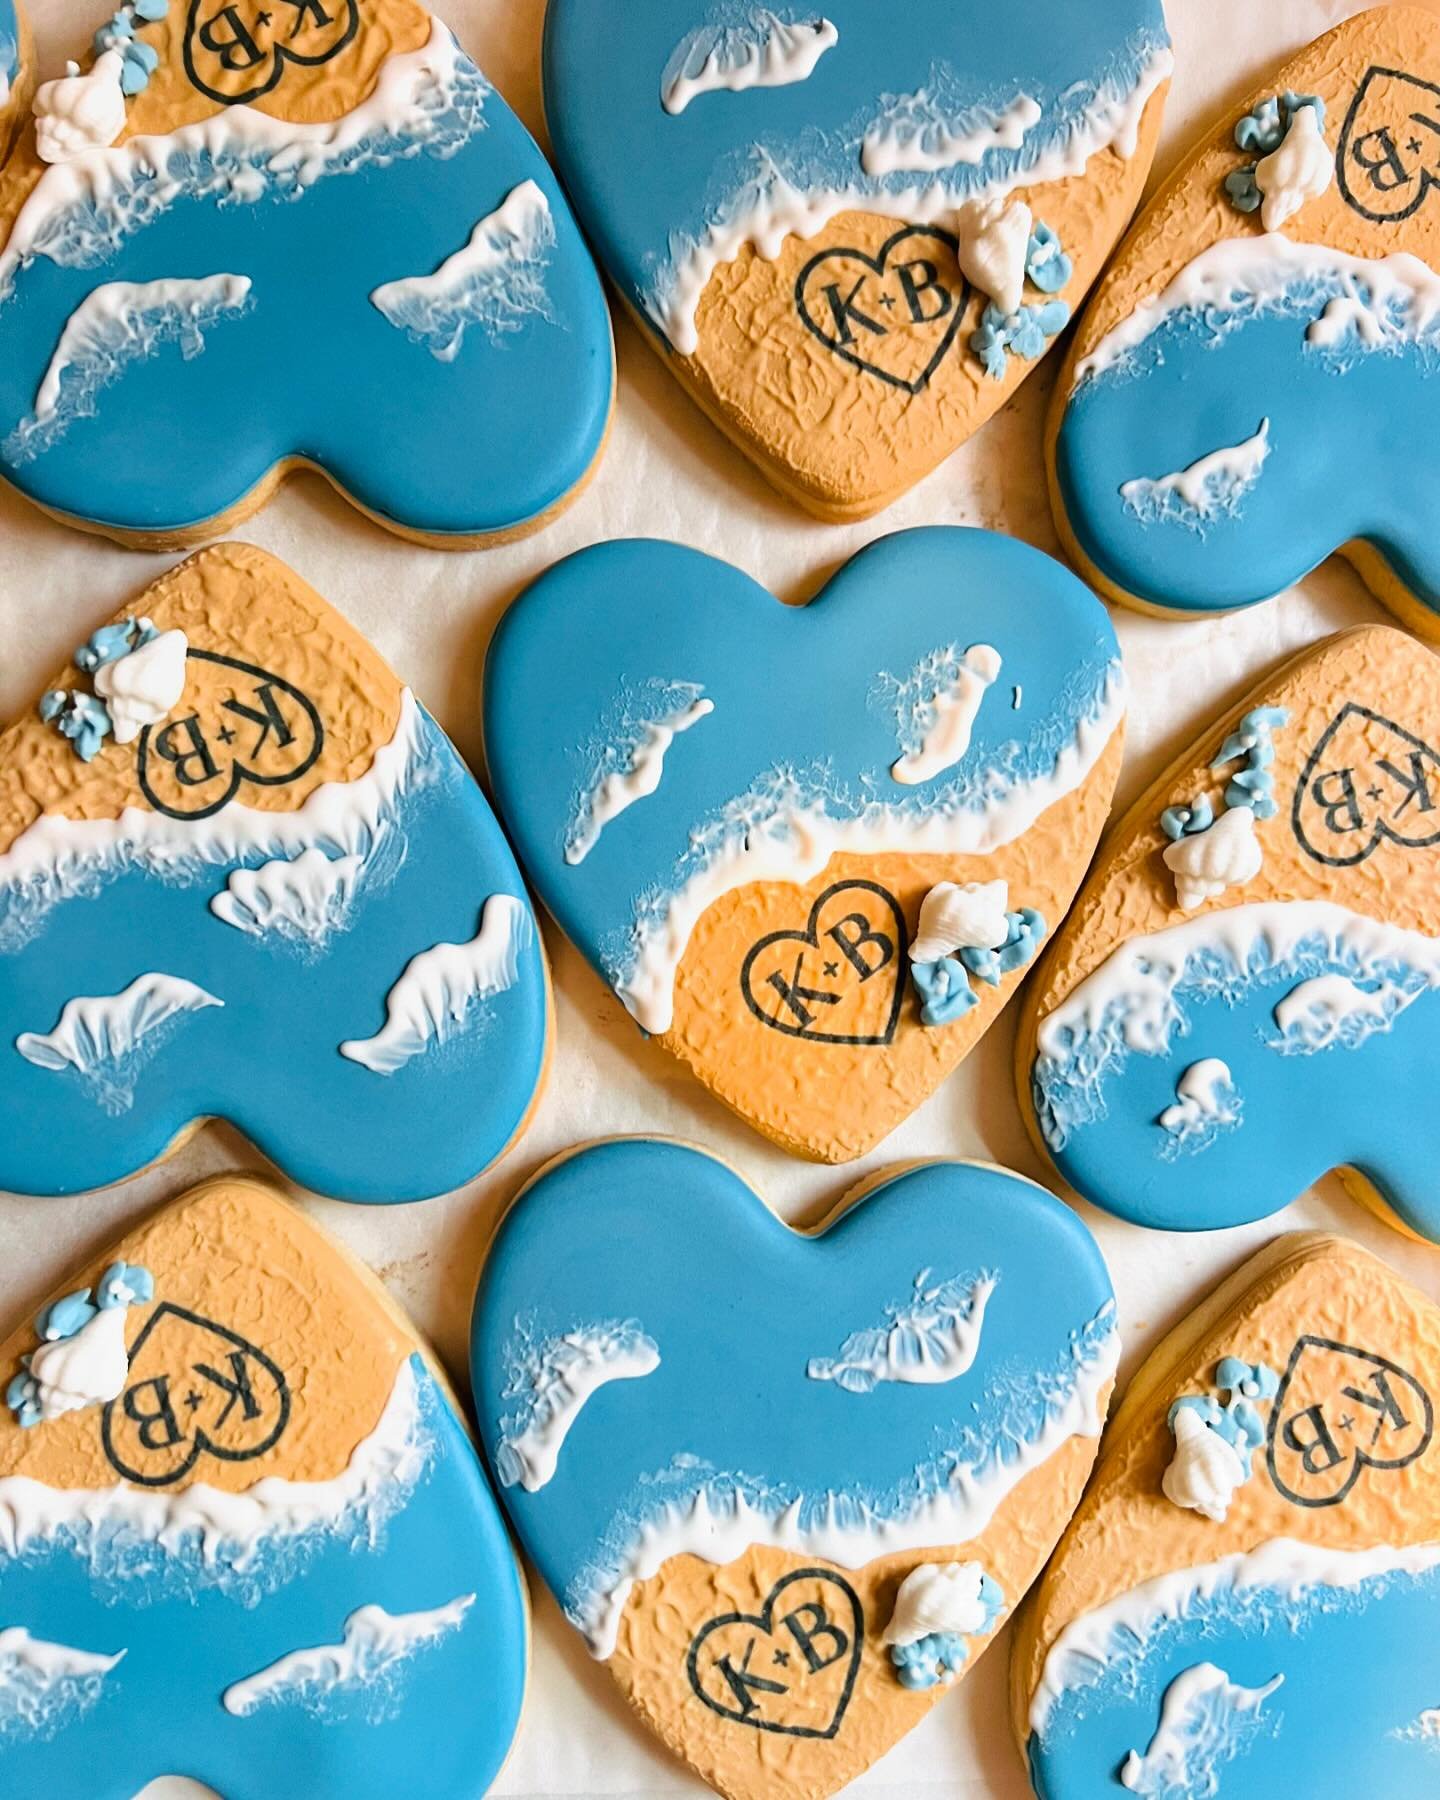 Slightly obsessed with the beach love vibes for this set 🌊🐚🦞

What a perfect treat for guests 🥰

#sandybeach #beacheave #beachycookies #happycouple #cookiepost #cookiedecorator #bakingmama #plymouthma #bostonma #capecodlife #maryhasvineyardlife #